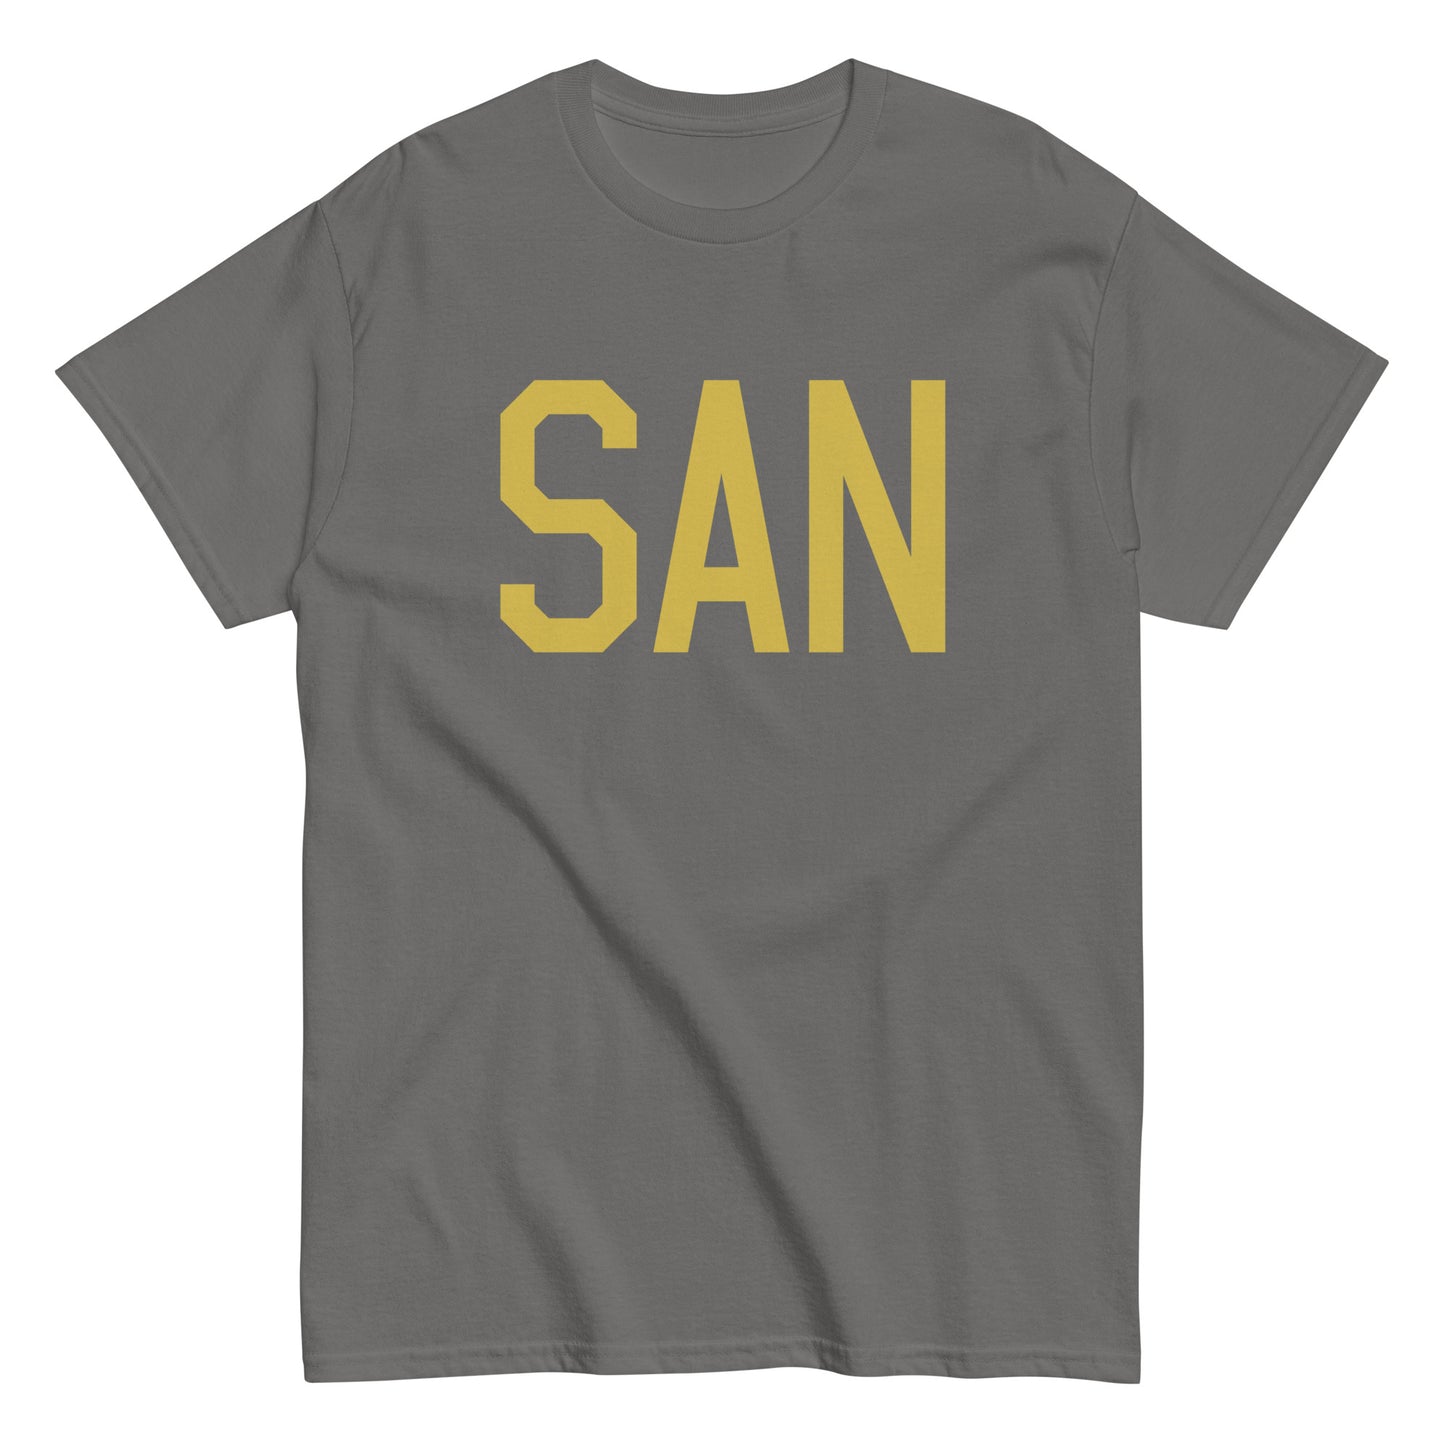 Aviation Enthusiast Men's Tee - Old Gold Graphic • SAN San Diego • YHM Designs - Image 01